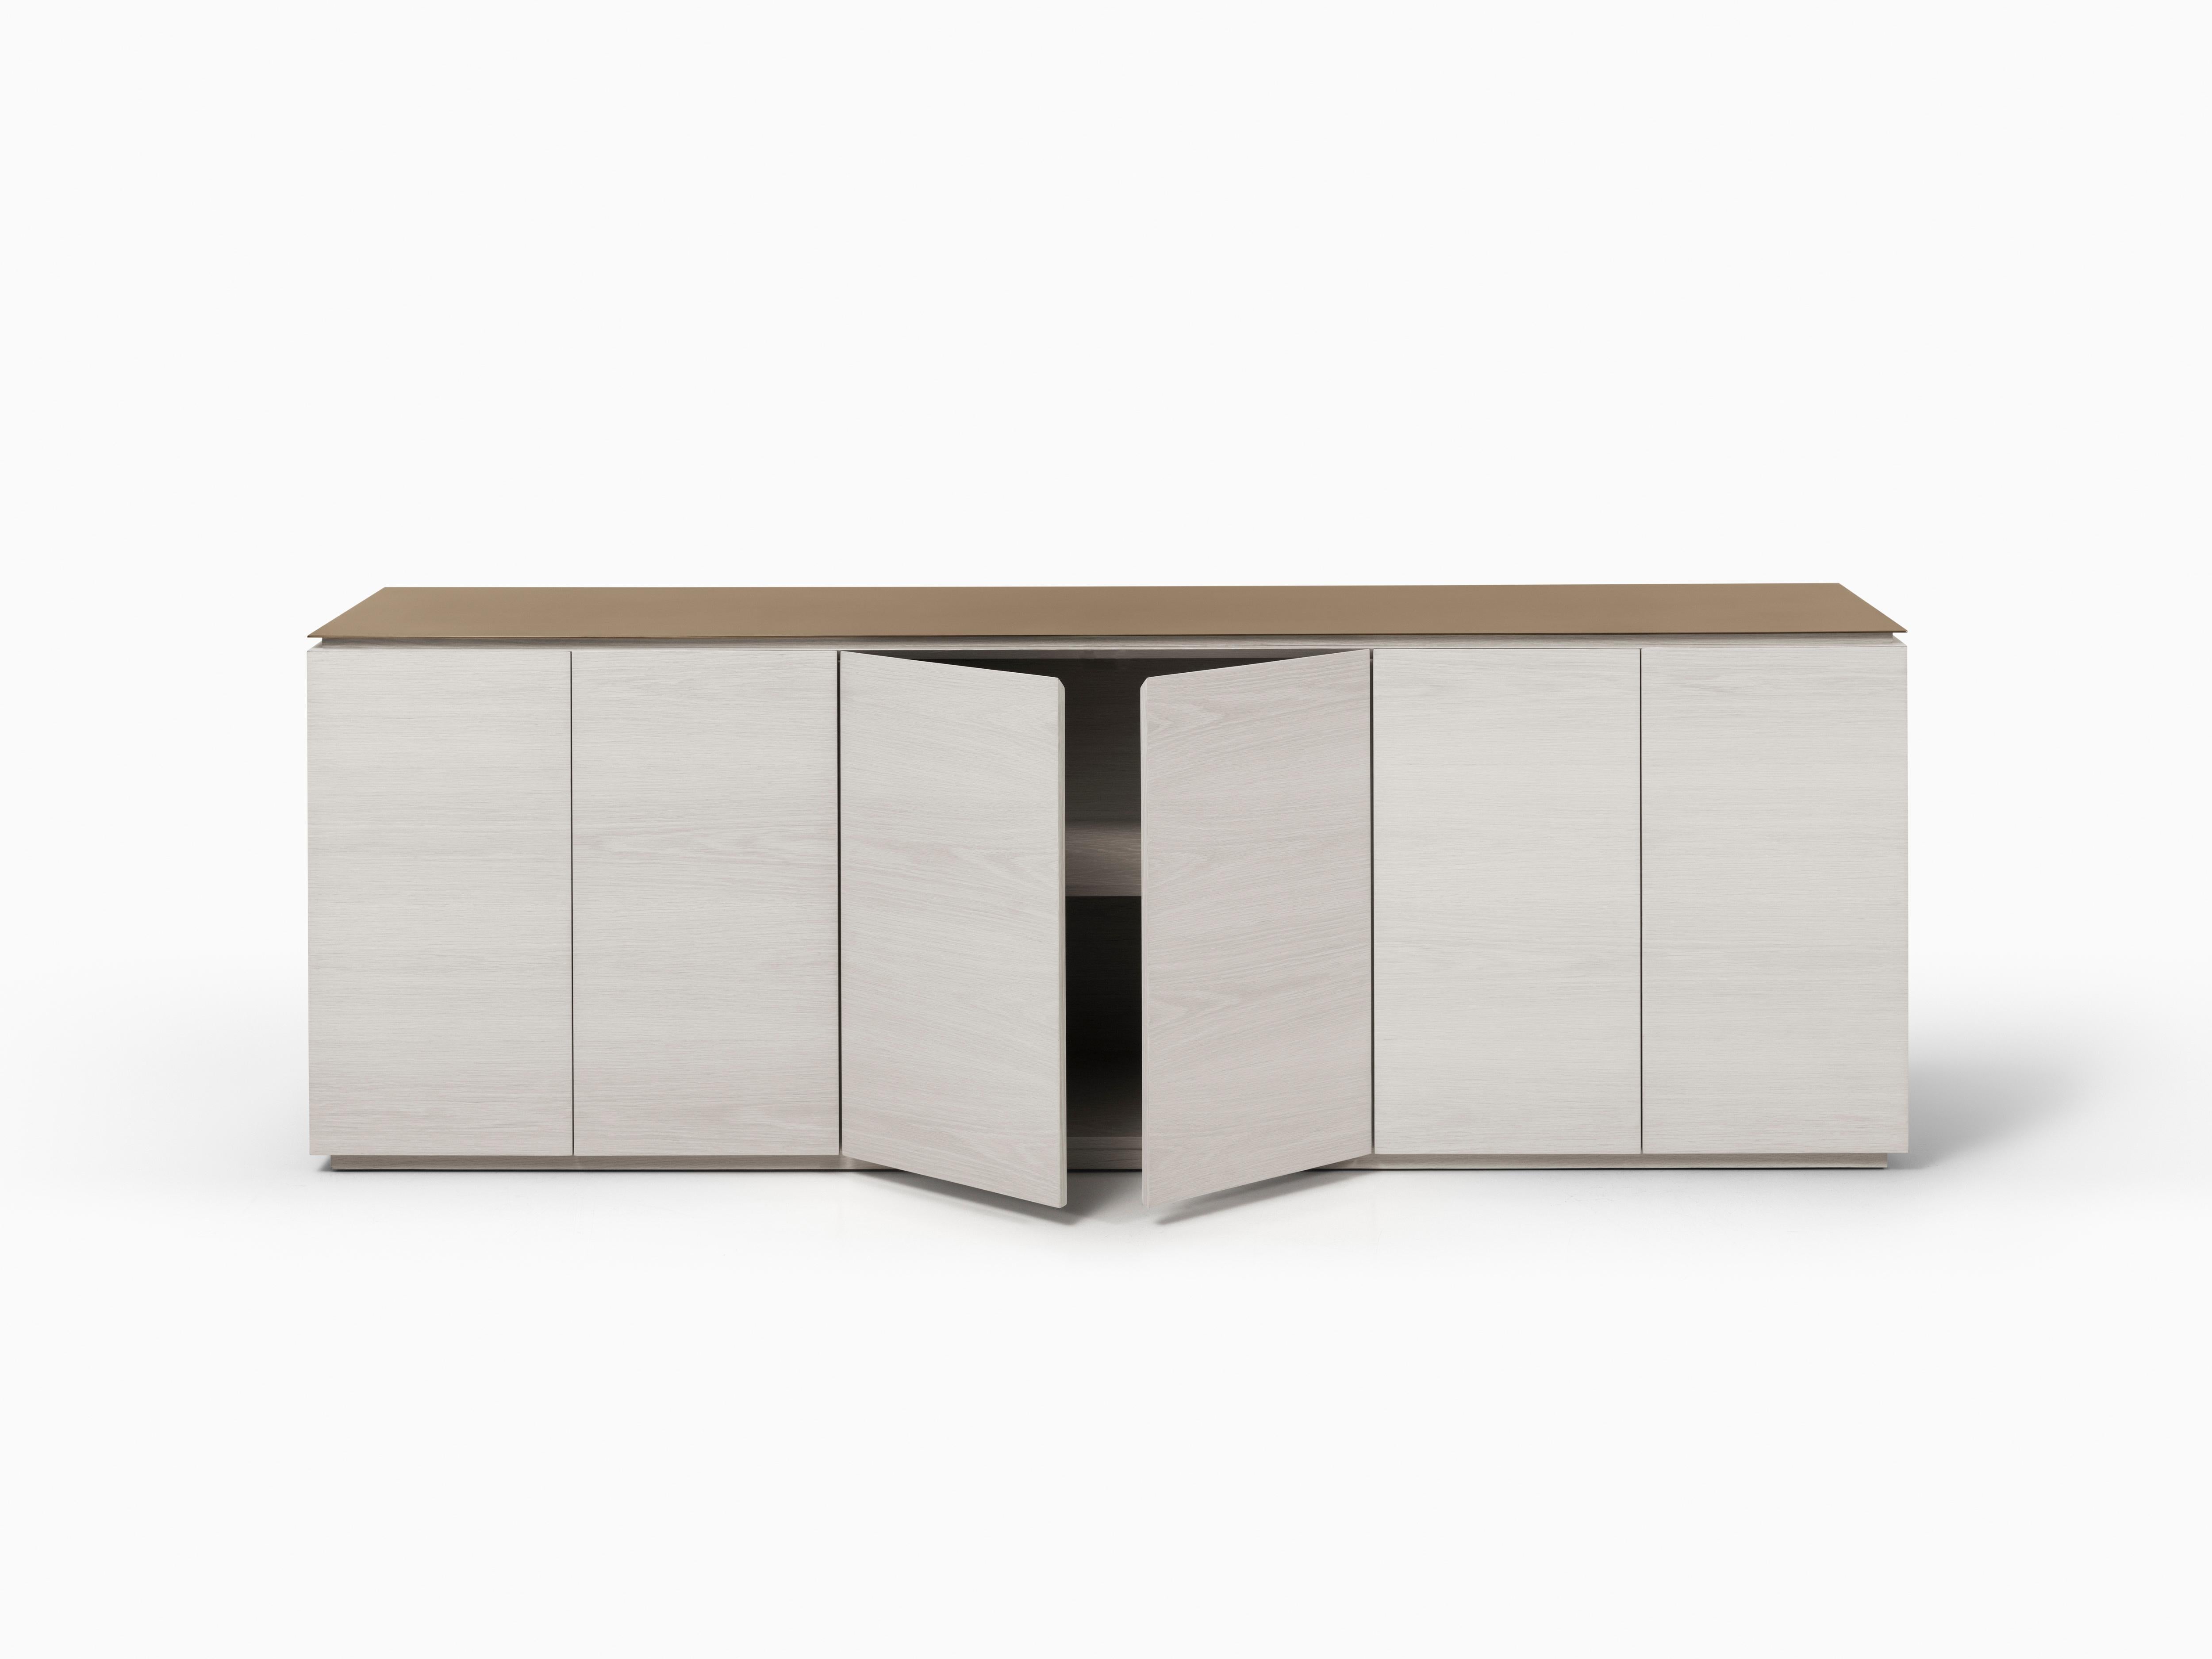 With a minimal design that showcases expertly crafted materials, the Monterrey Credenza by Chai Ming Studios combines storage with style for any space. Six touch-latch doors reveal a bevel edge detail and three adjustable shelves that provide